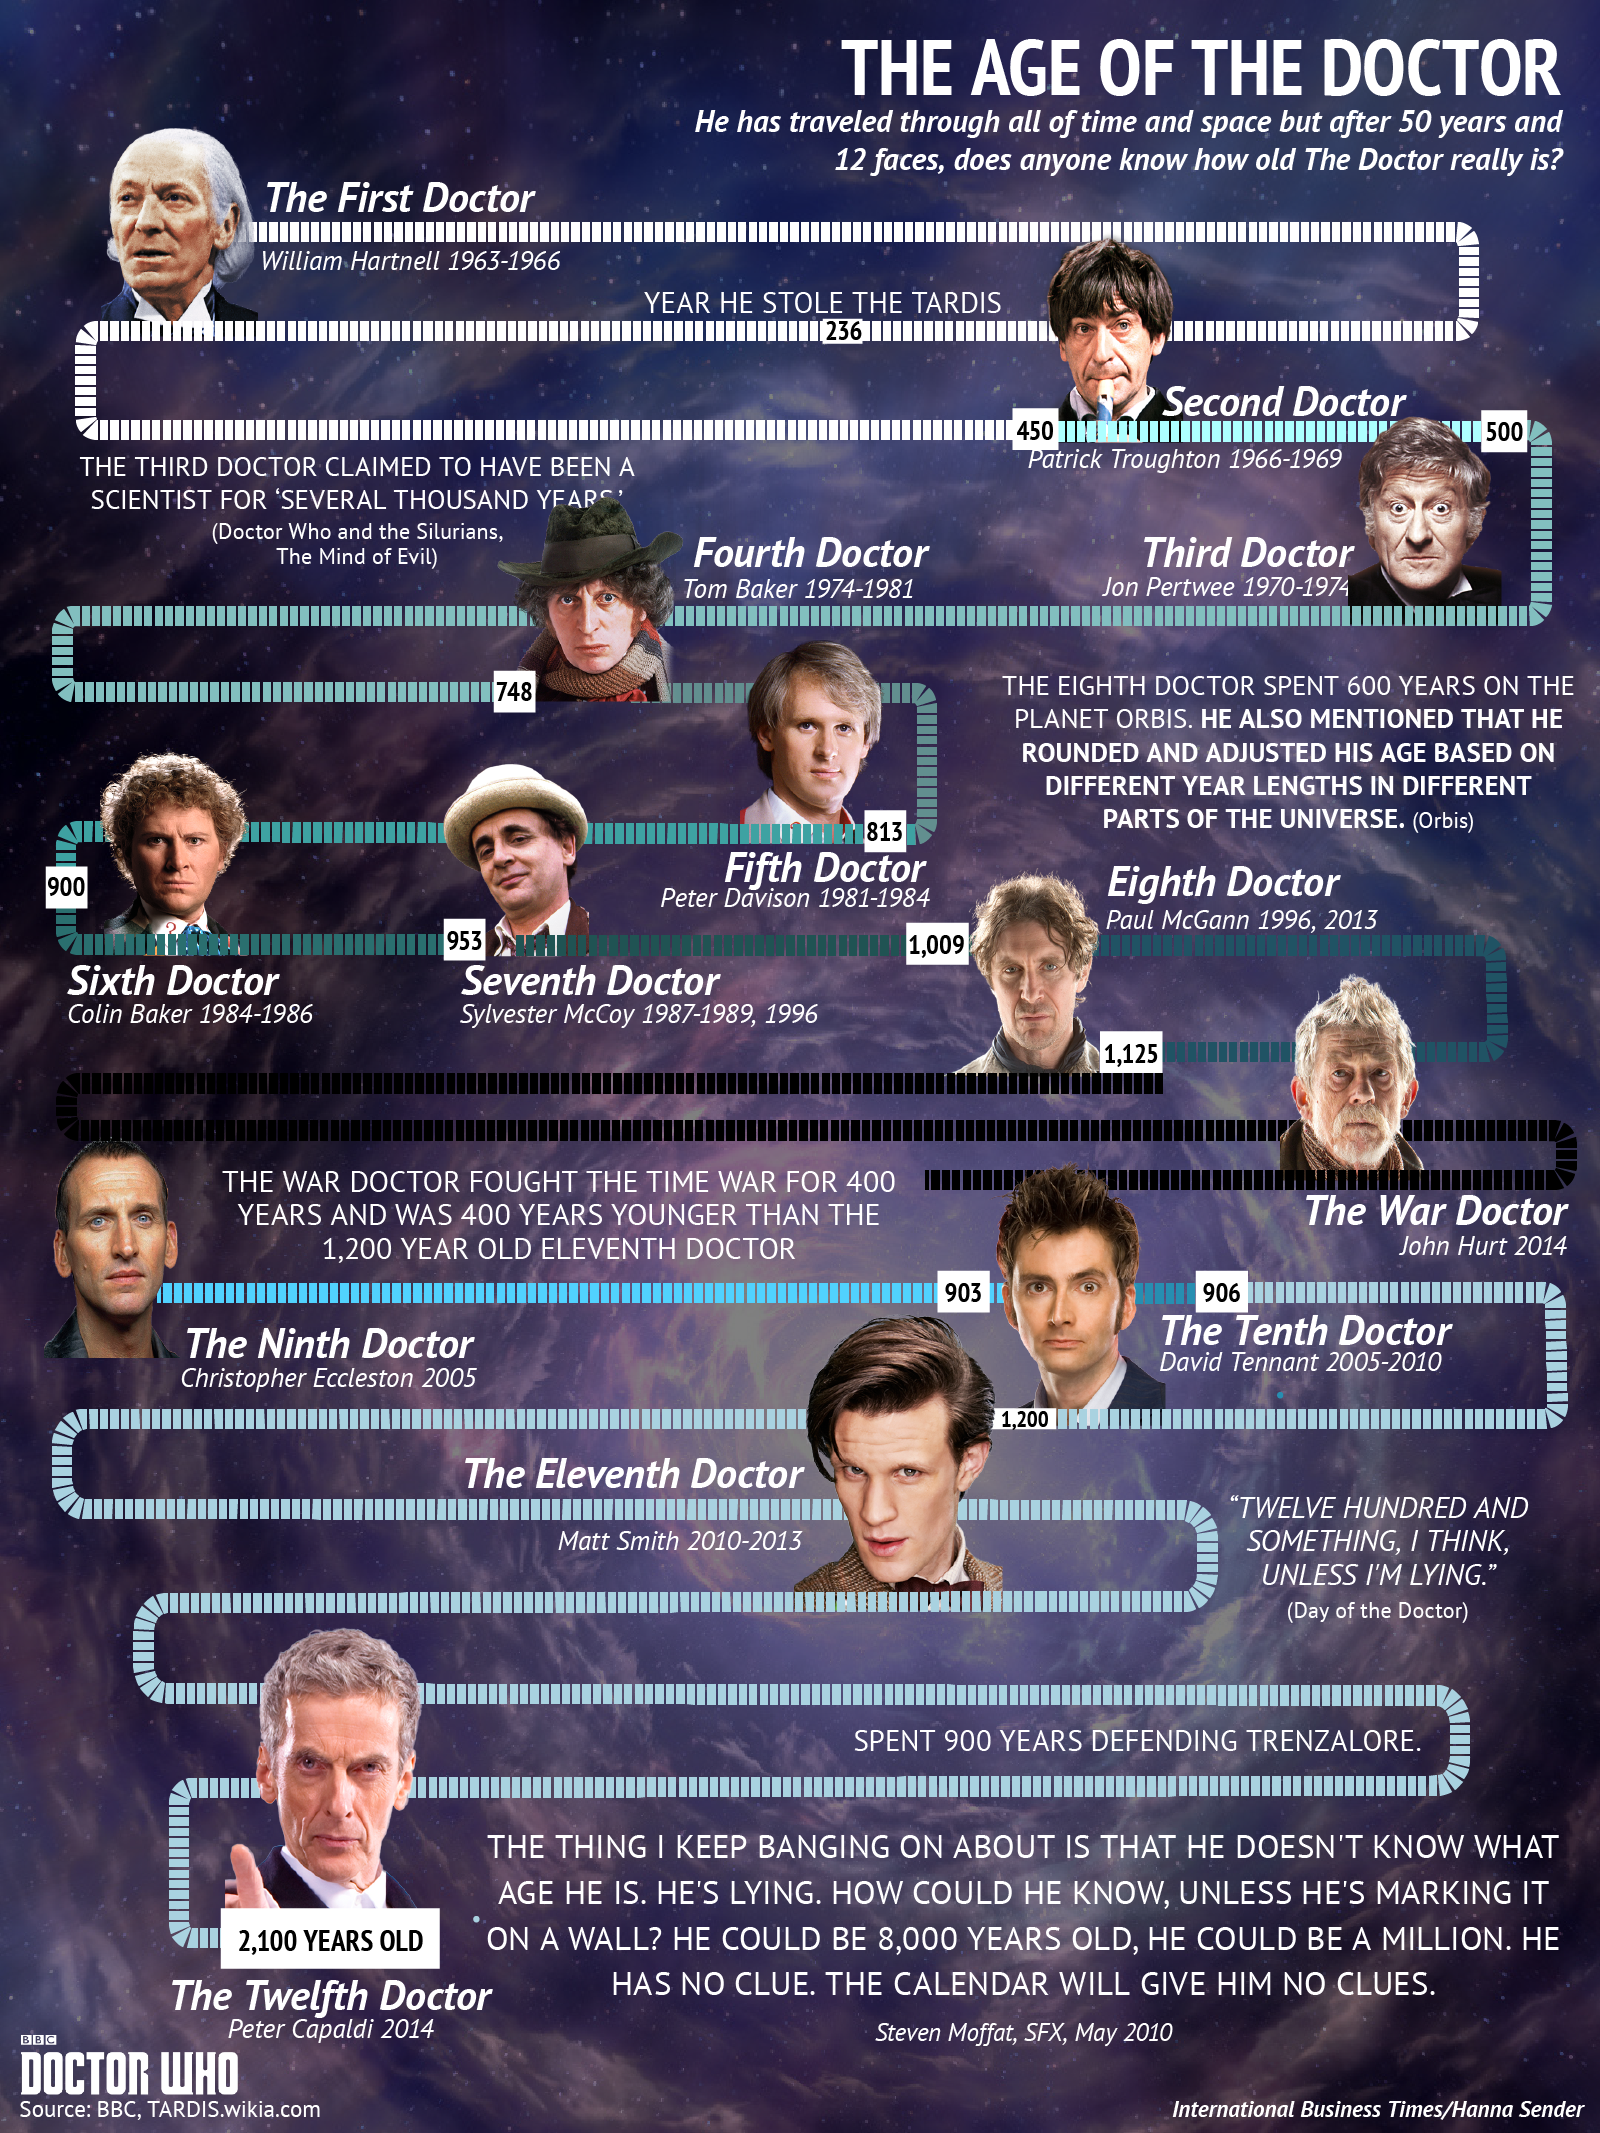 doctor-who-infographic-age-of-the-doctor-timeline